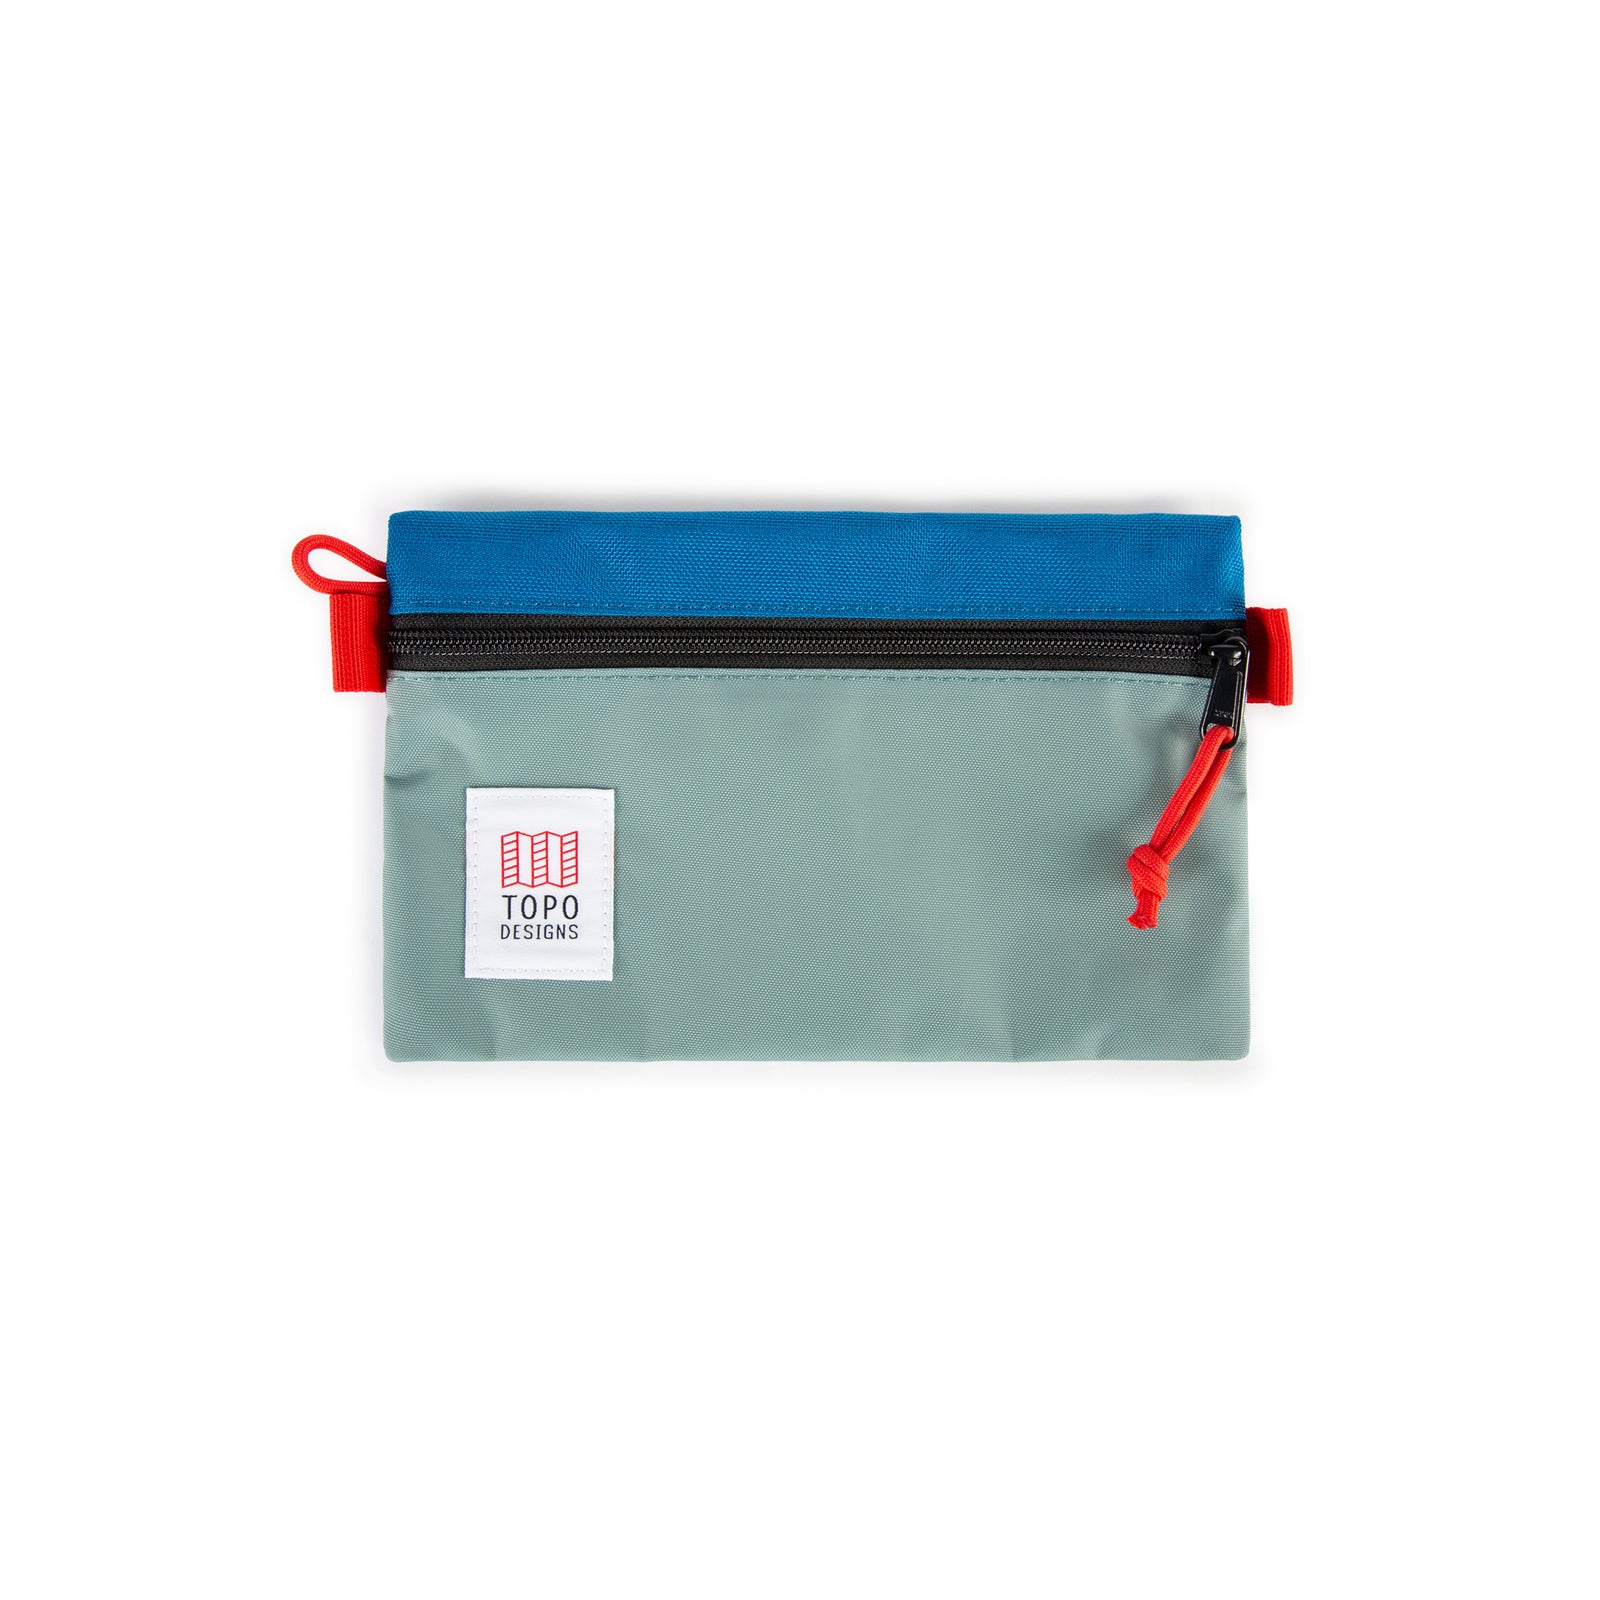 Topo Designs Accessory Bags in "Small" "Mineral Blue / Blue - Recycled".